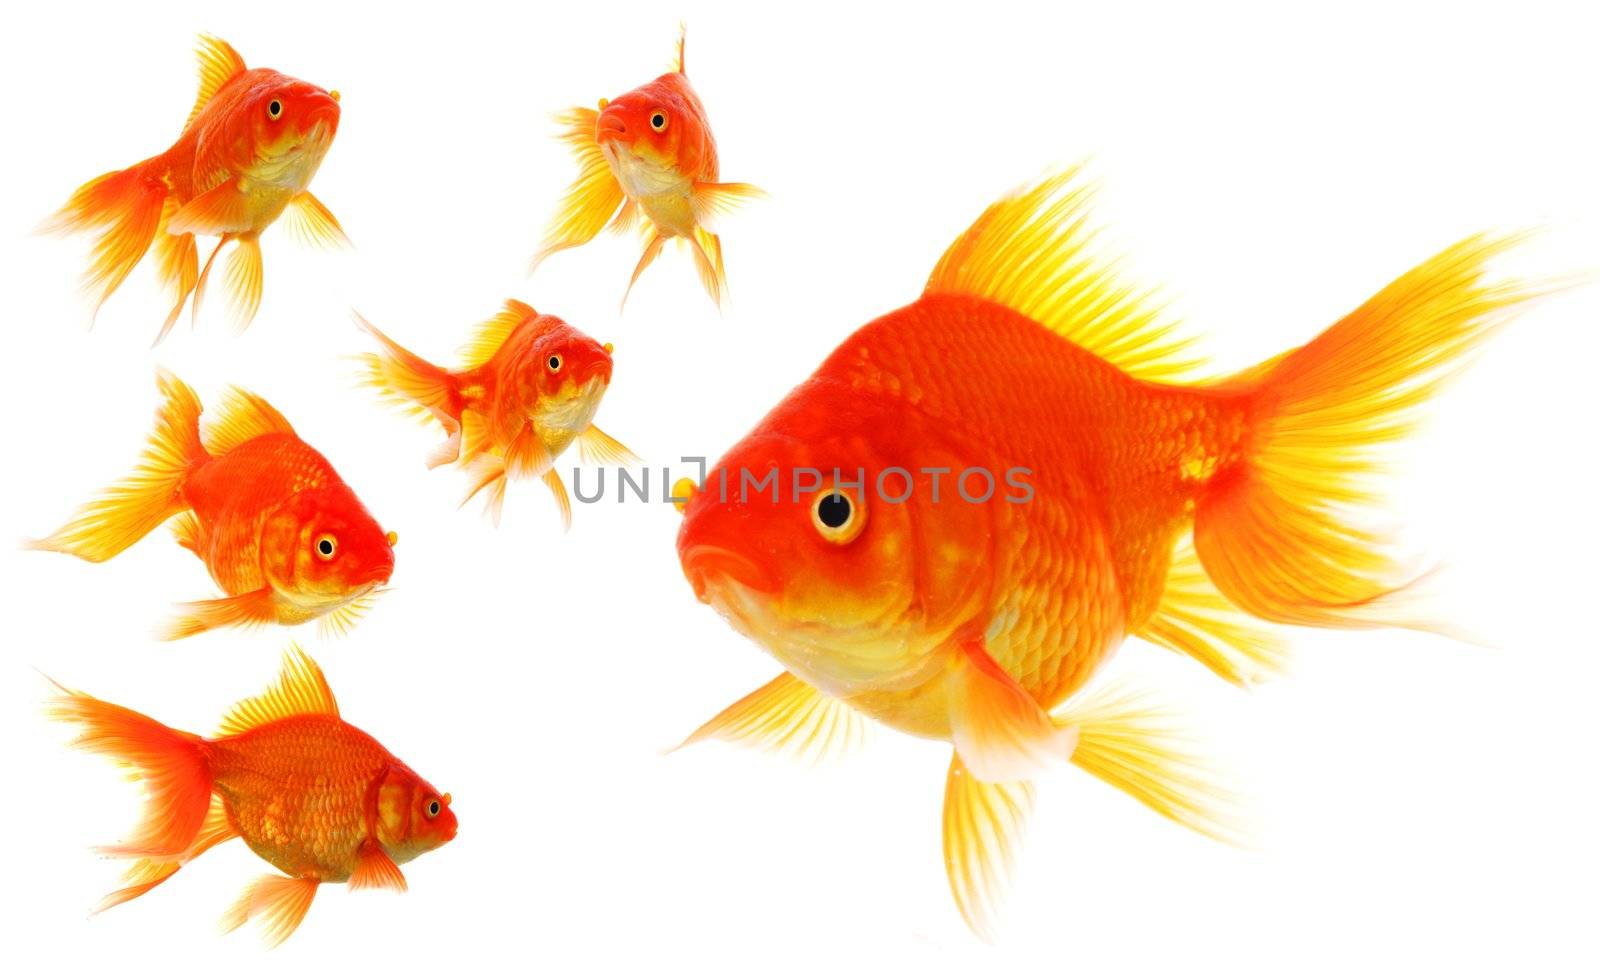 goldfish collection or group or fishes isolated on white background